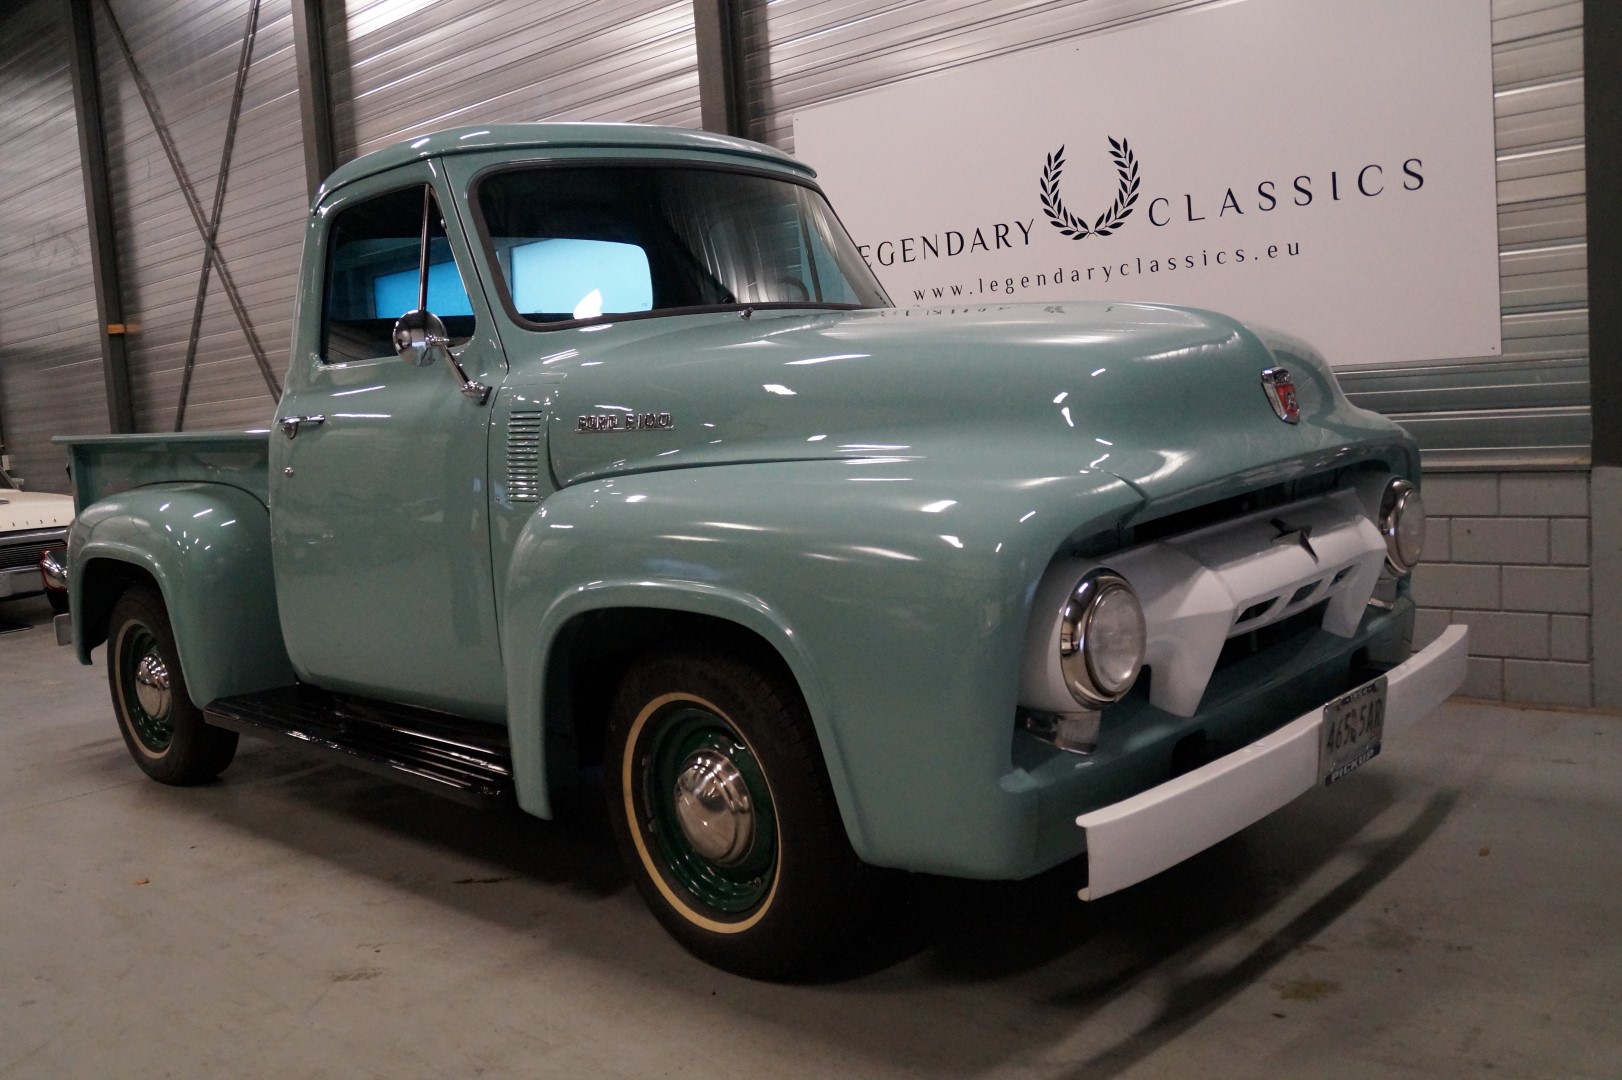 Buy this Ford F100   at Legendary Classics (1)